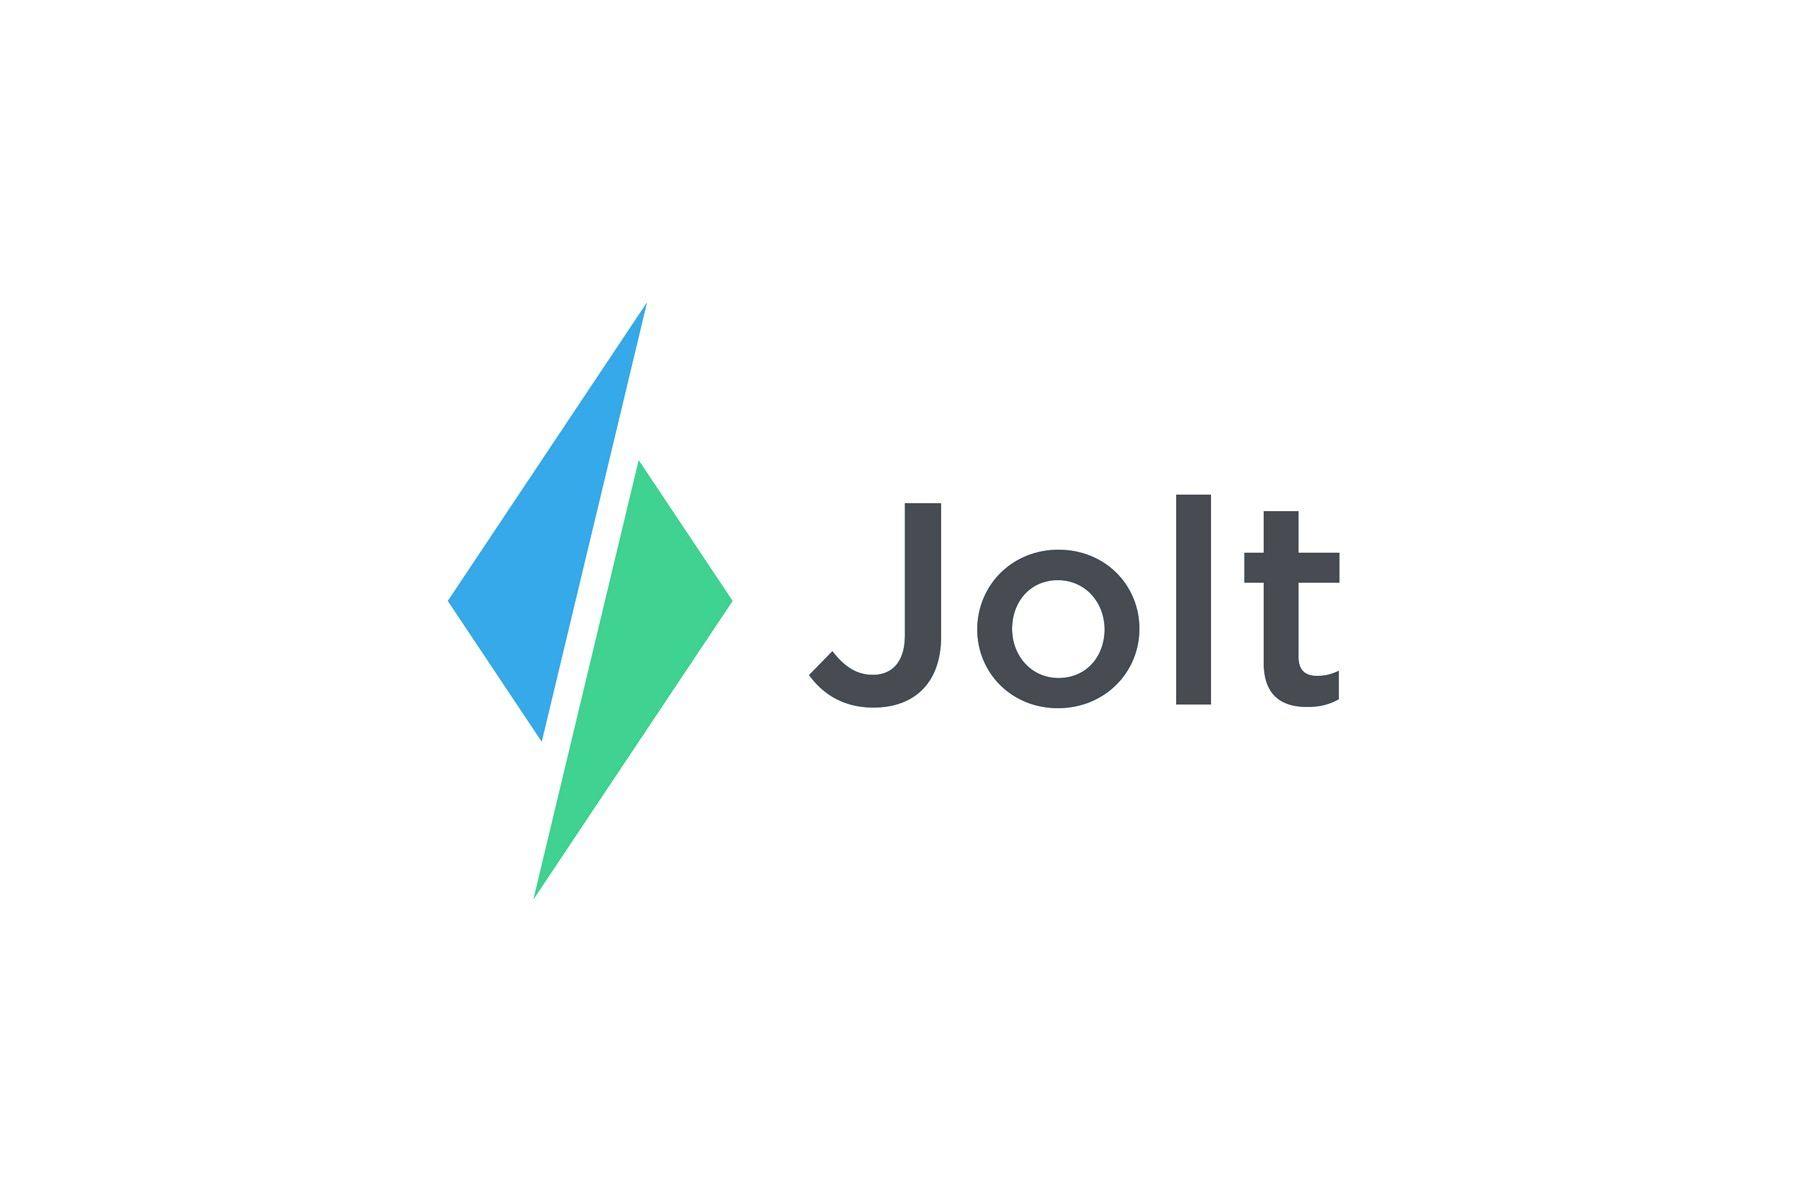 Jolt Logo - Full Jolt Scheduling Software review you need to know about